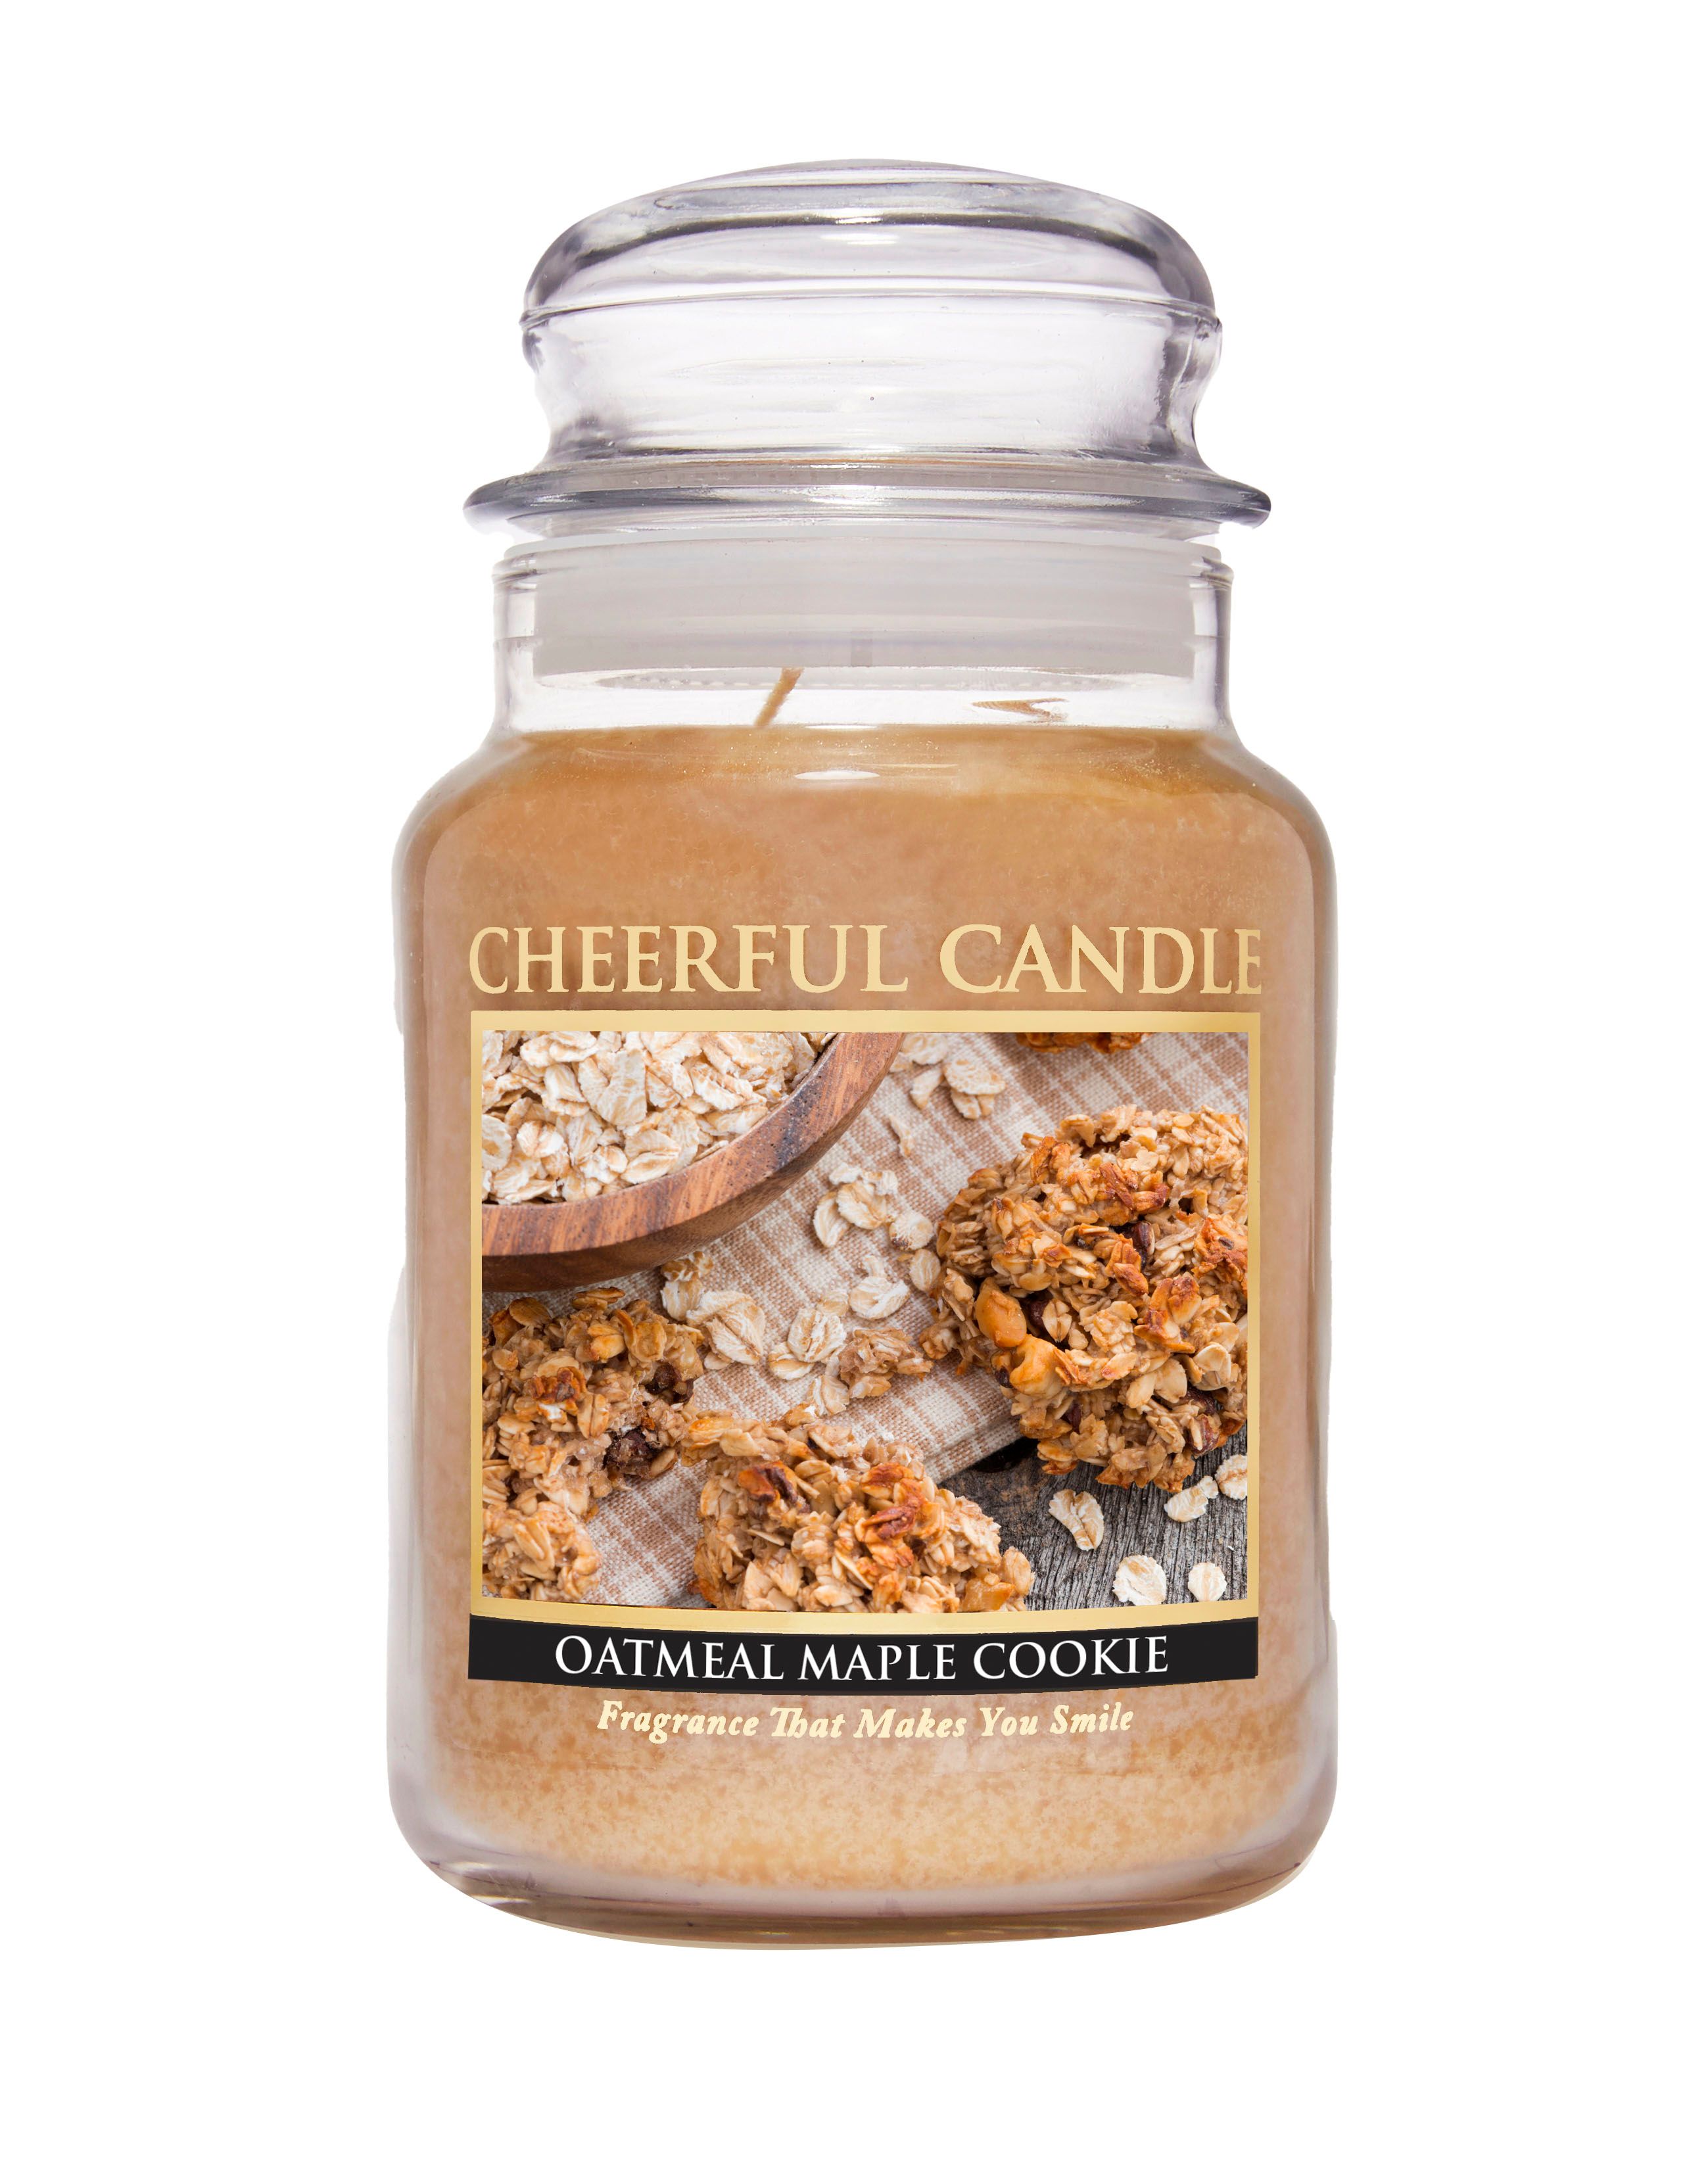 OATMEAL MAPLE COOKIE Large - Cheerfull Candle